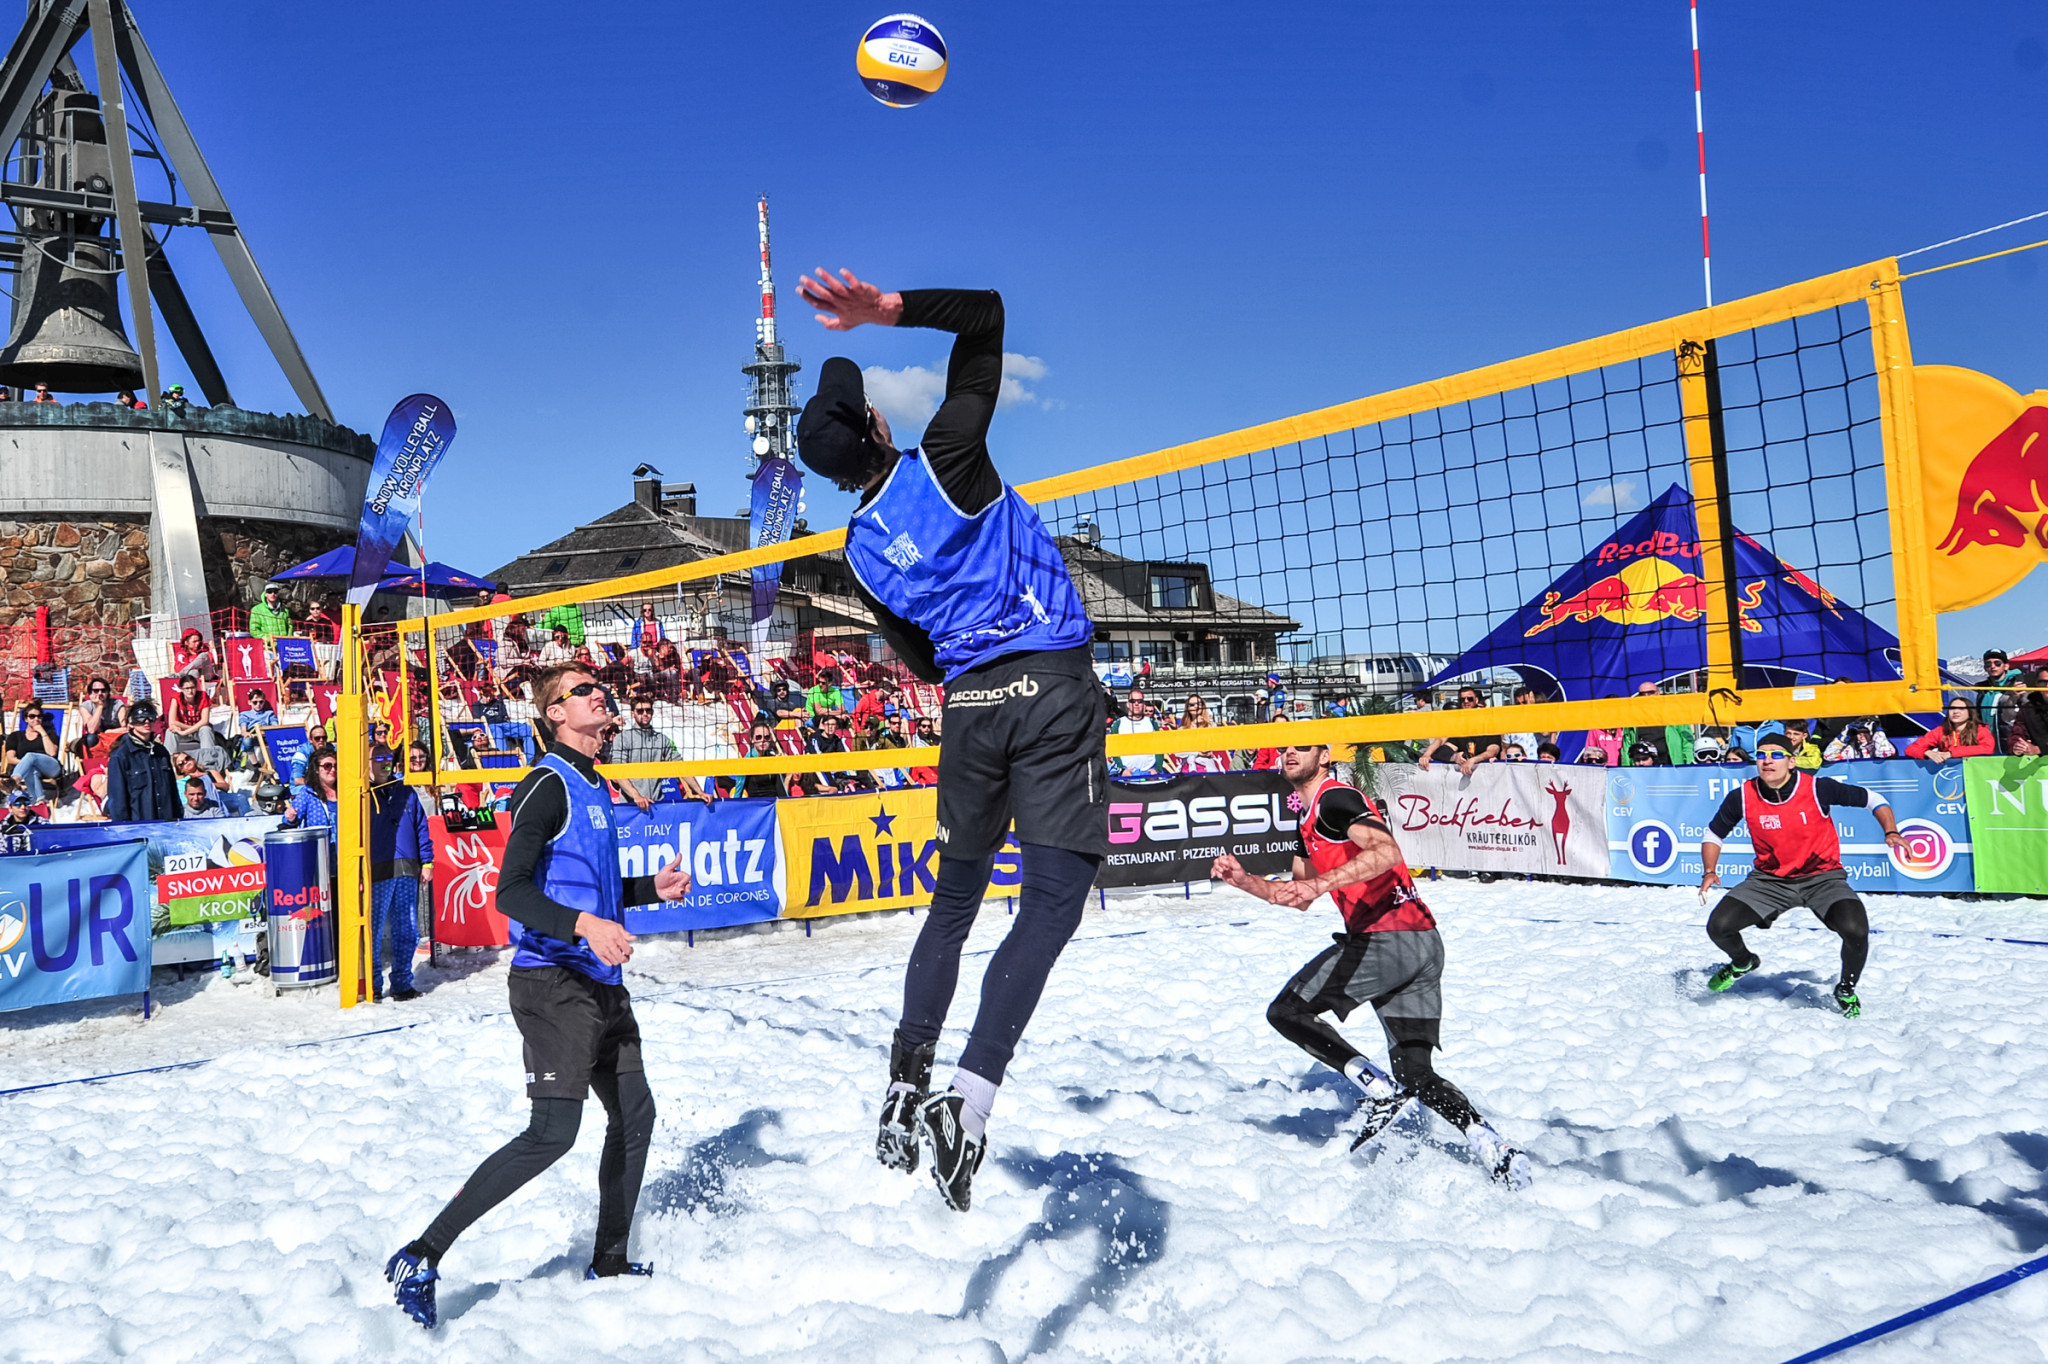 The FIVB held their first Snow Volleyball World Tour in 2019 ©FIVB